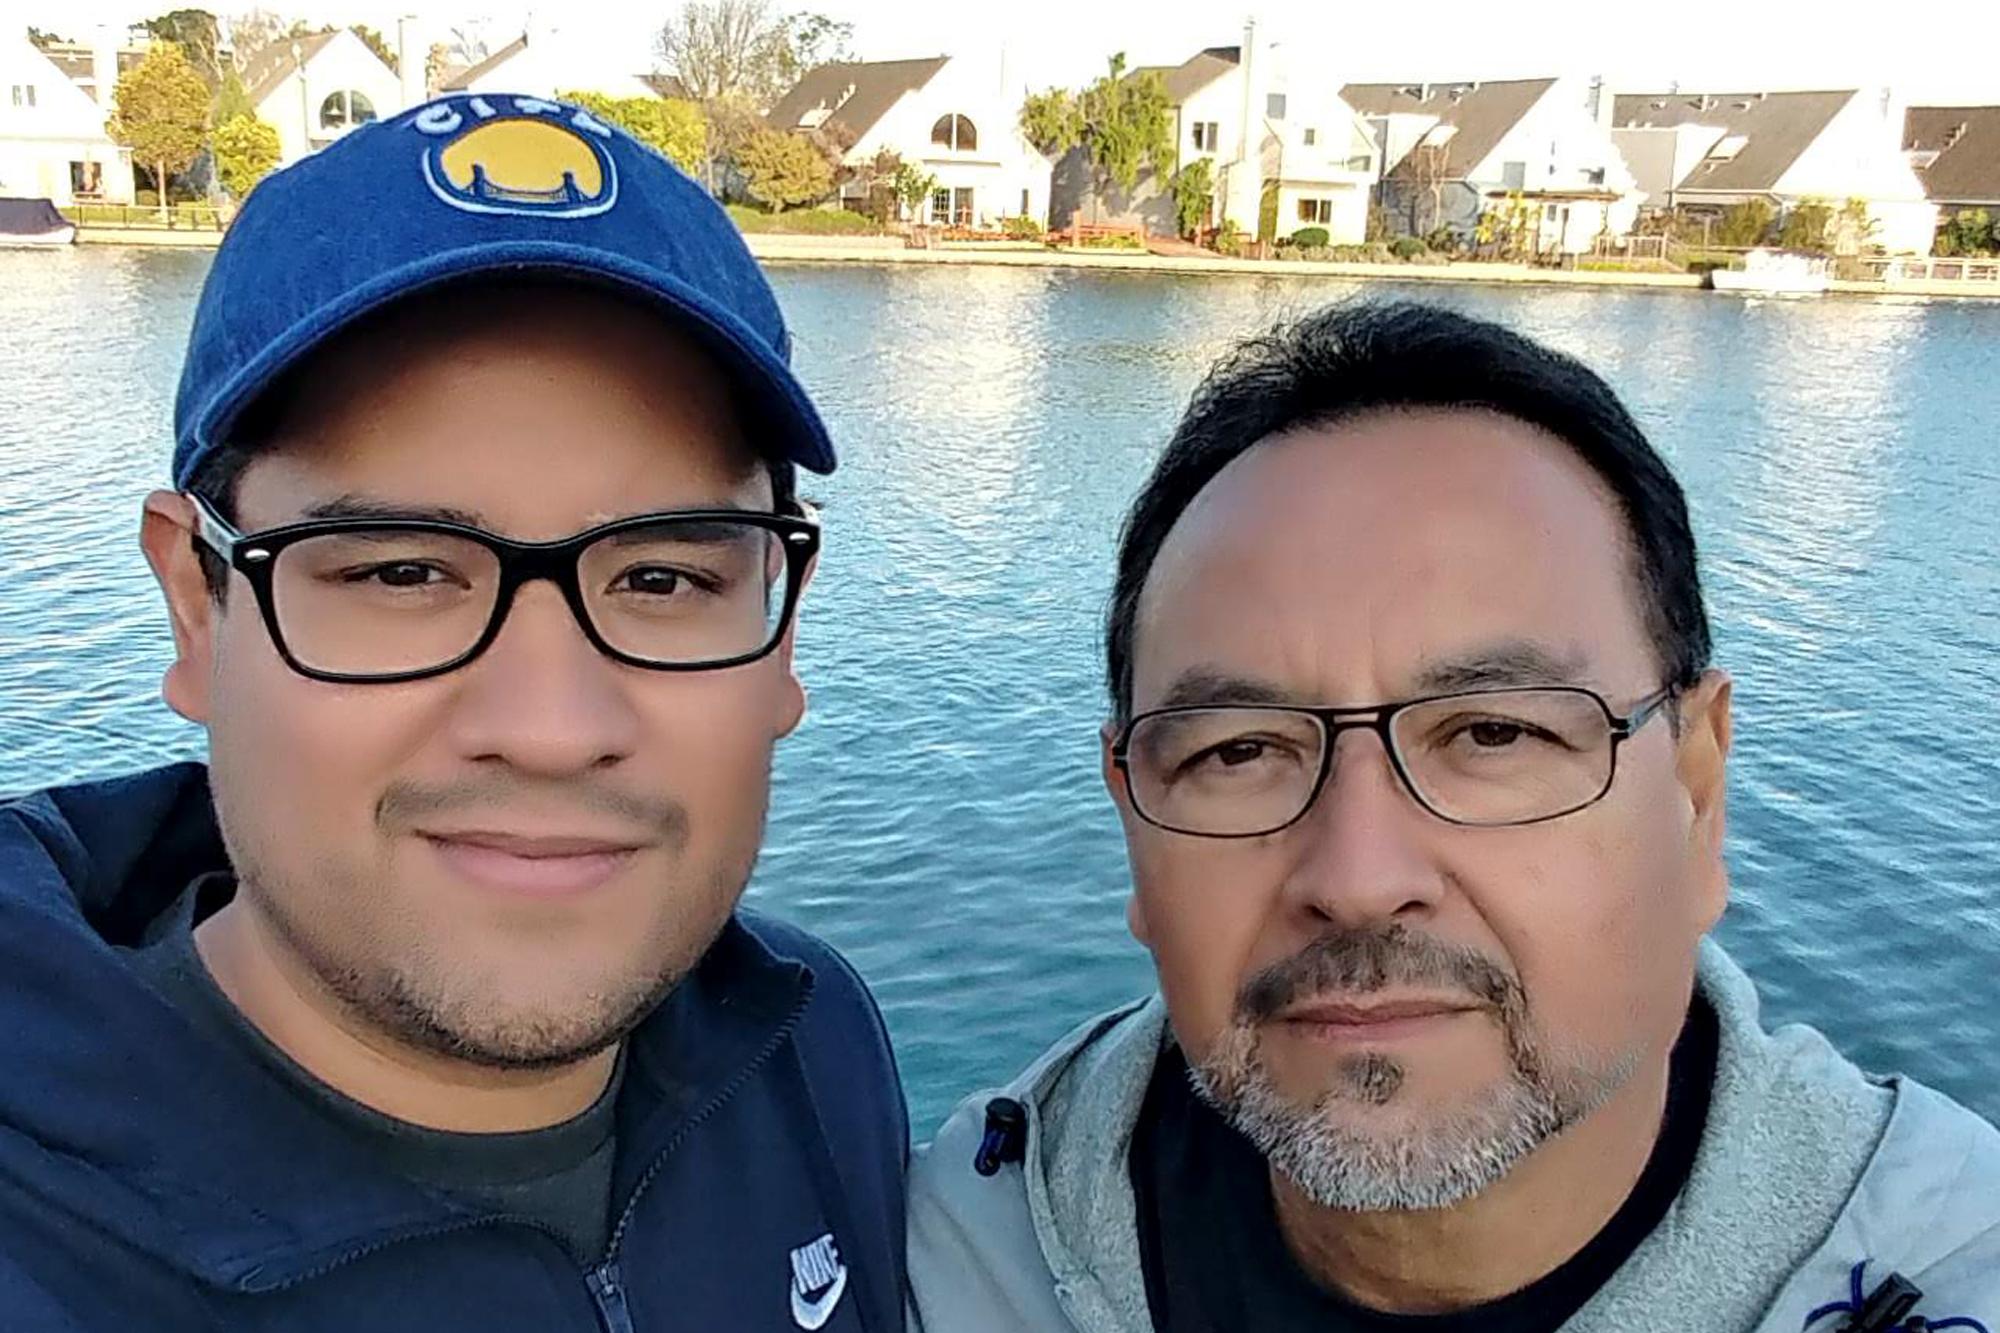 Father and son, both named Carlos. They are U.S. residents. Photo courtesy of the family.